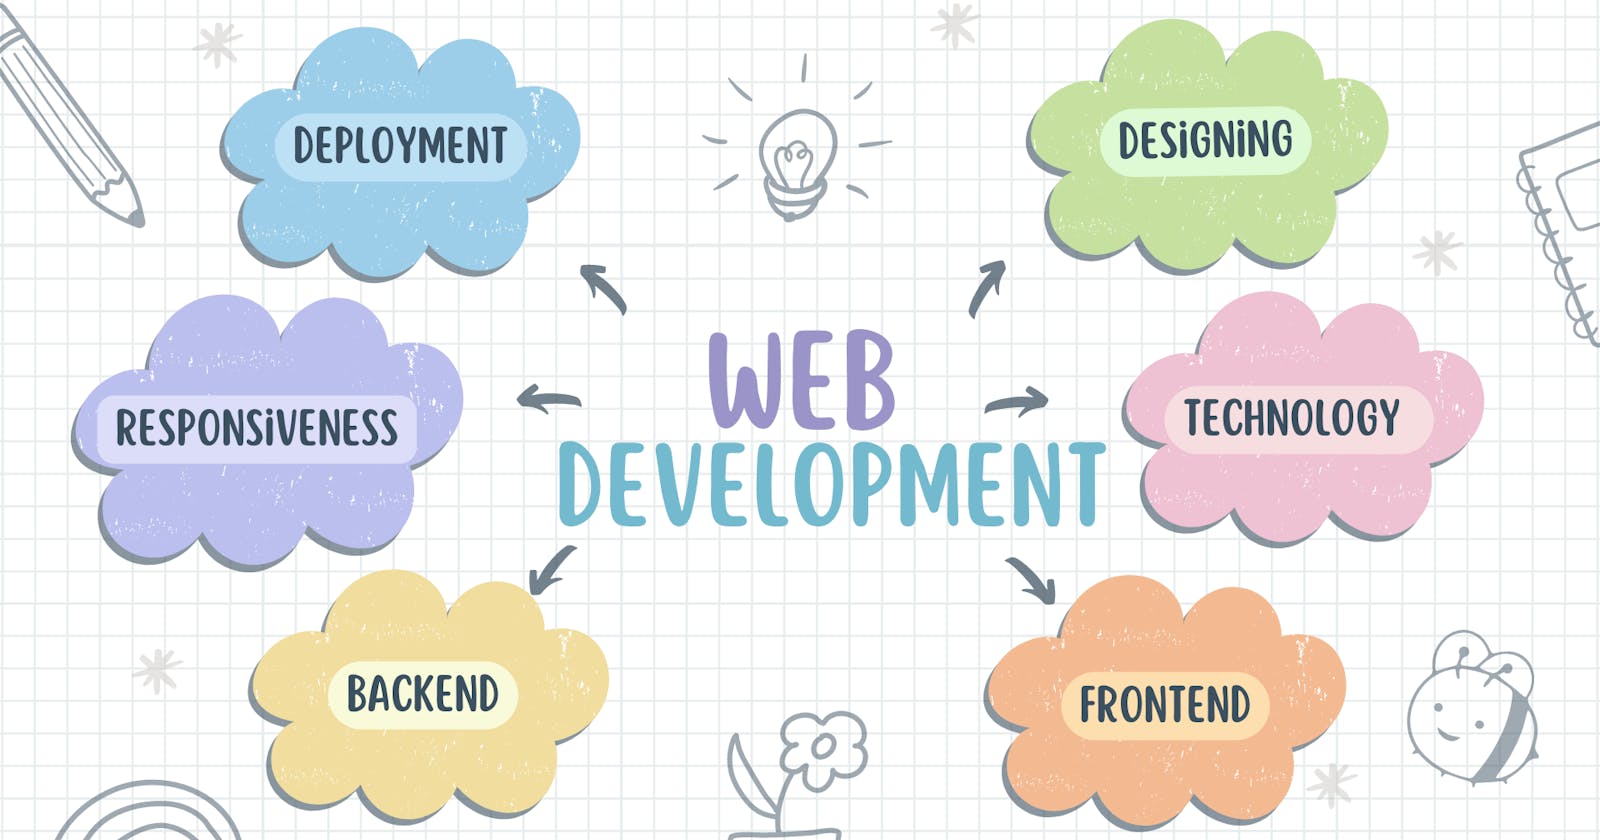 Getting started with Web Development